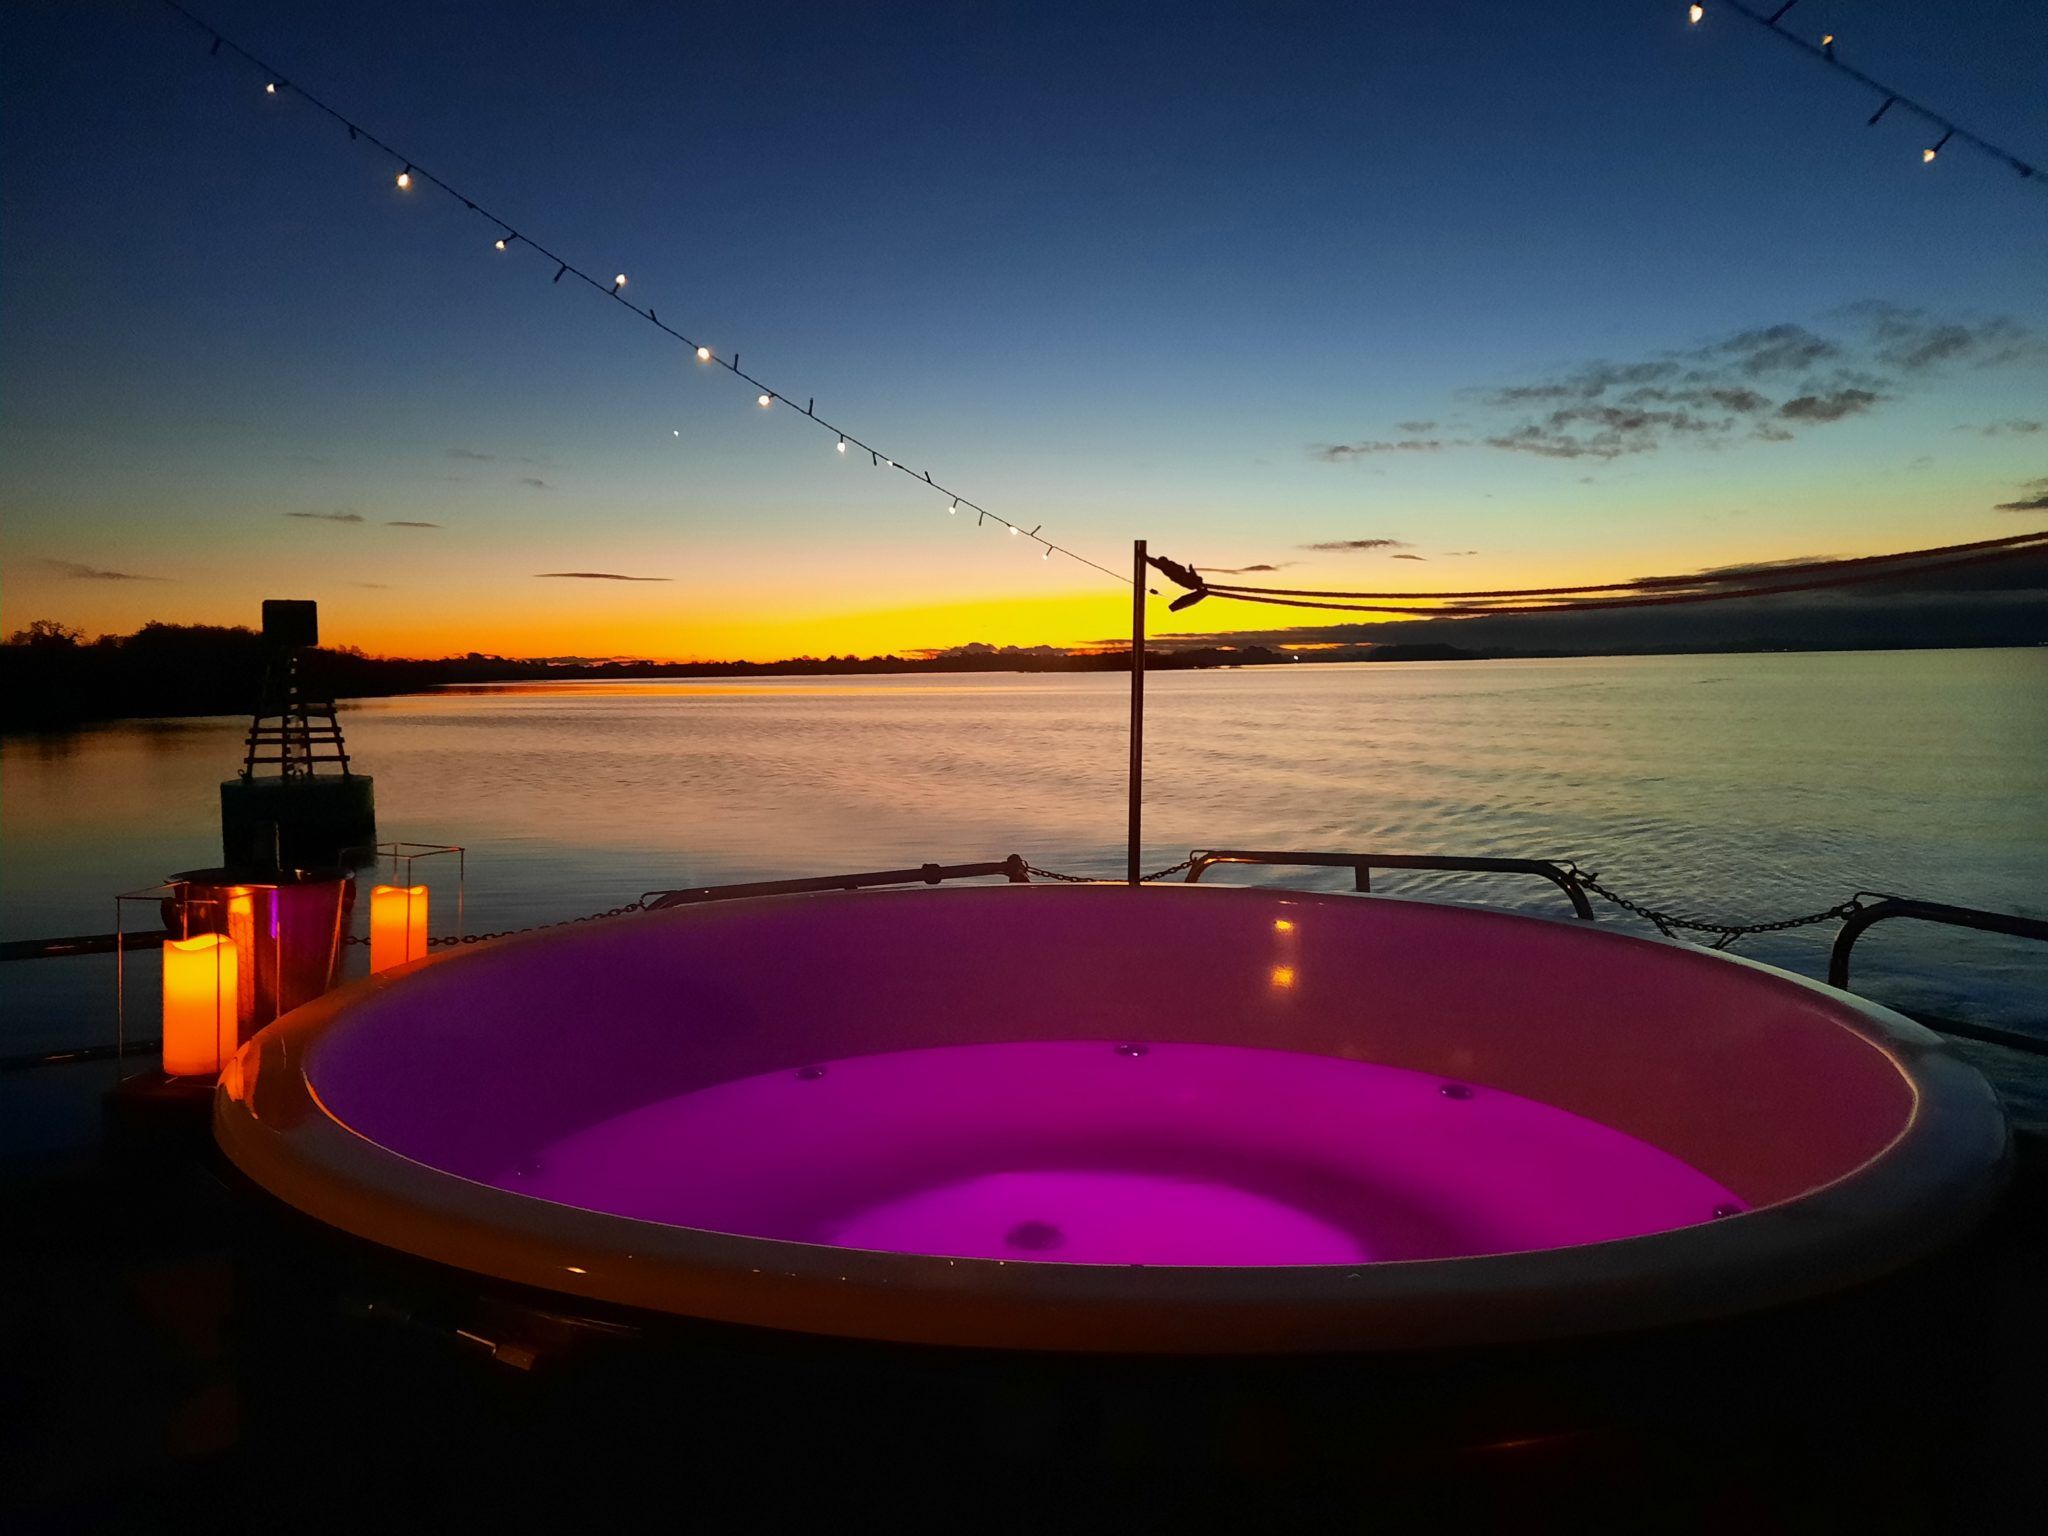 hot tub surrounded by fairy lights and lanterns, a body of water in the background